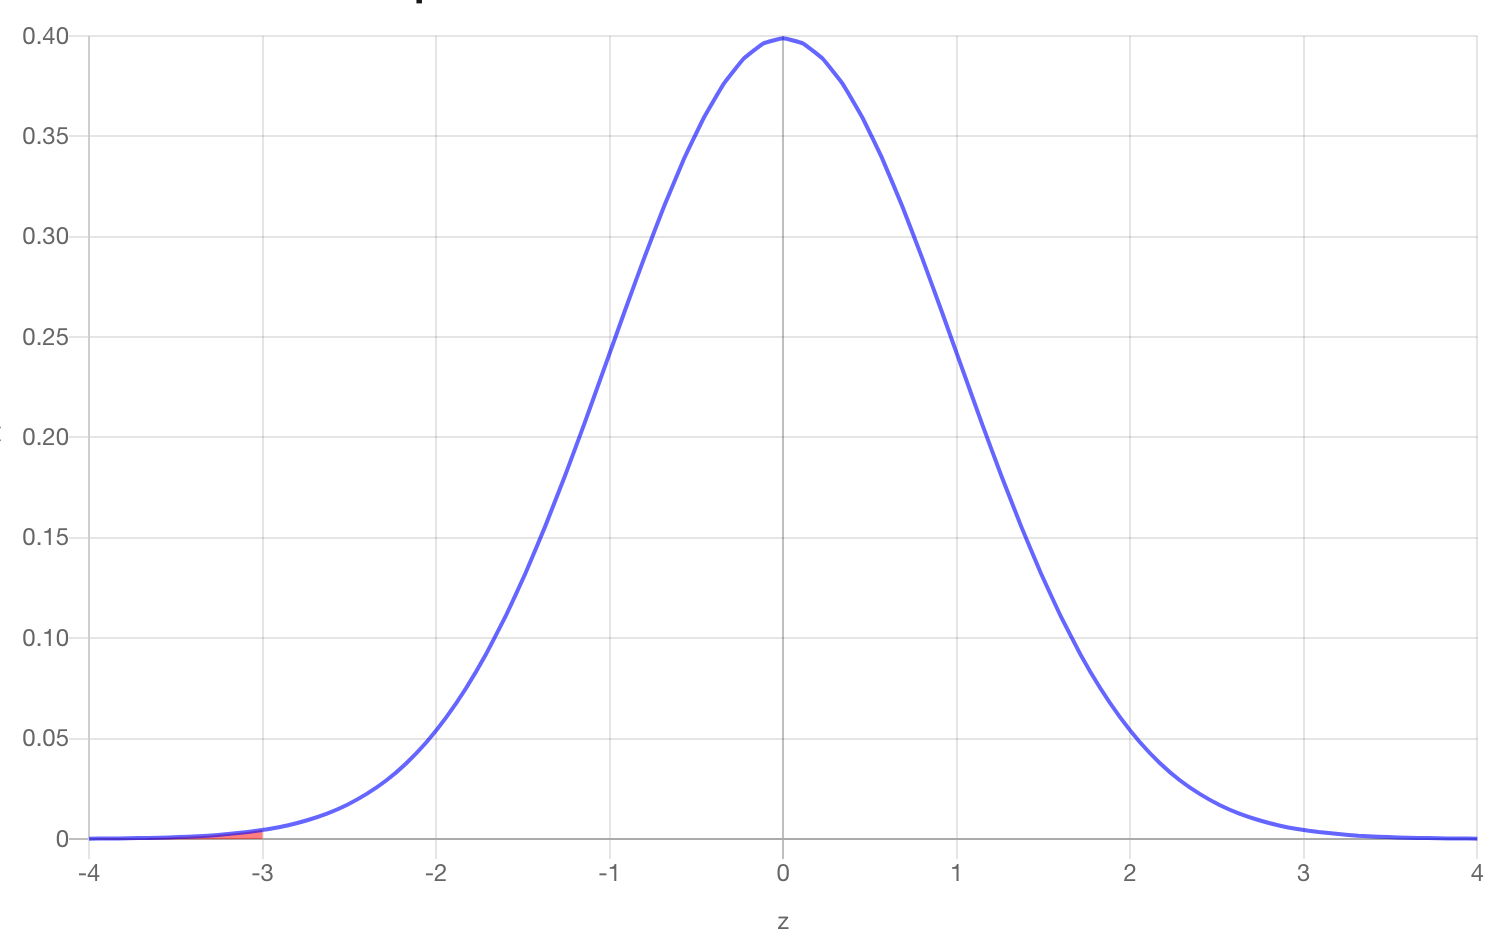 hypothesis testing towards data science